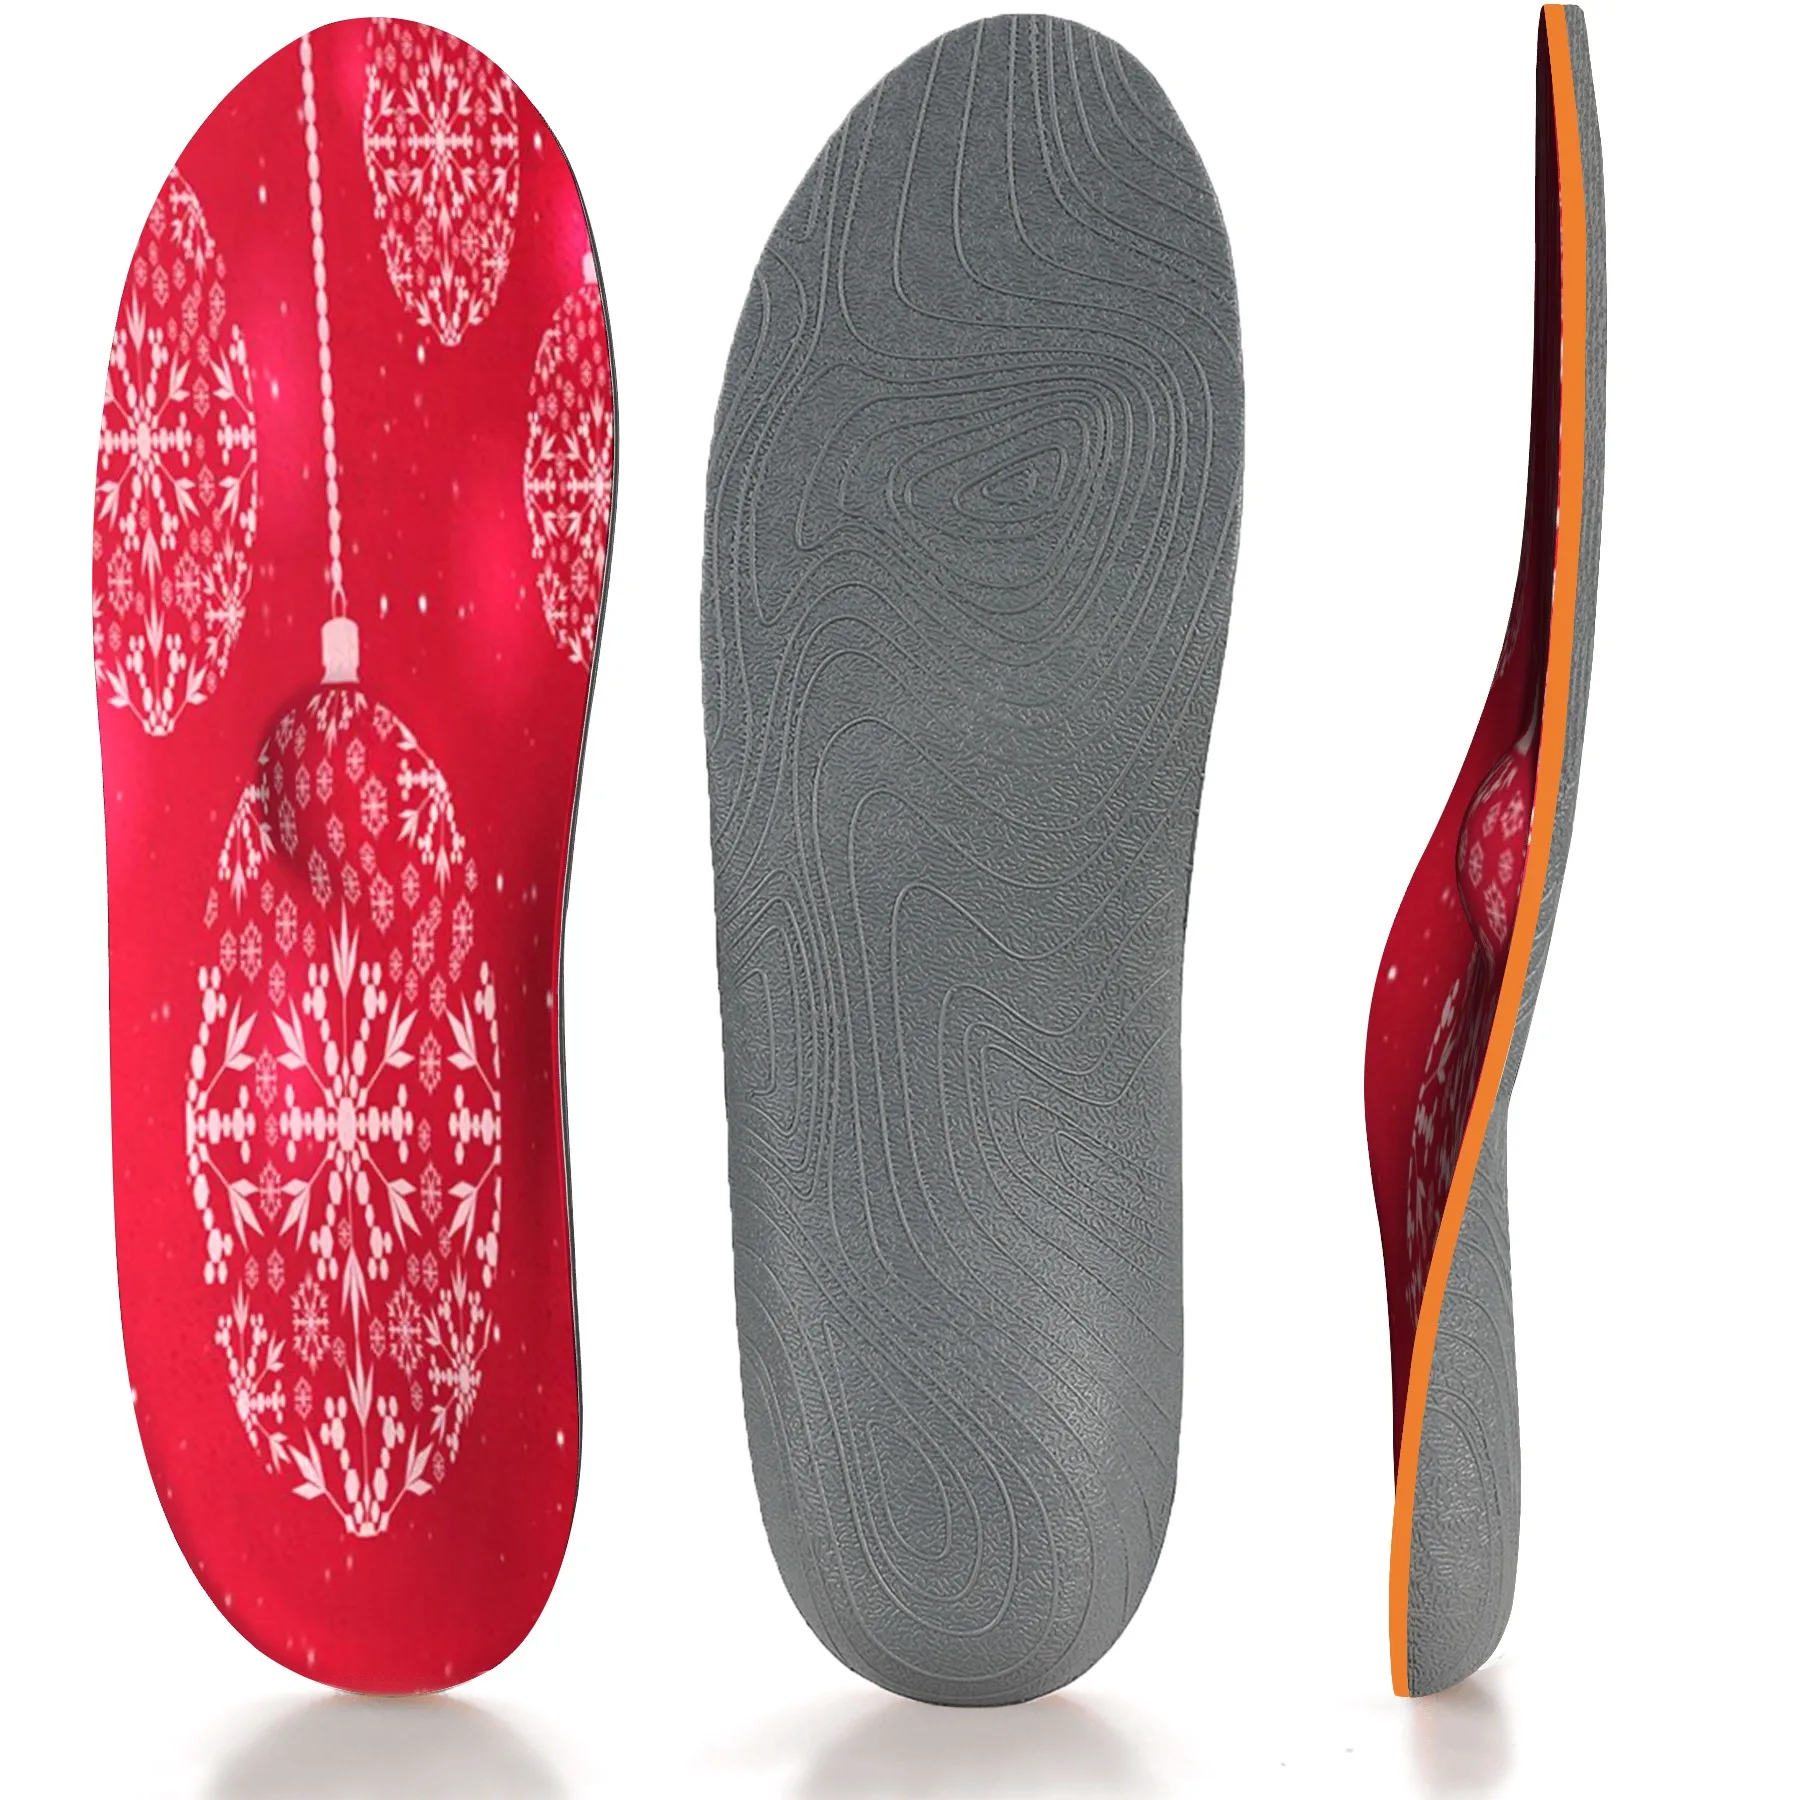 Full-Length Summer Cool Sports Insole Foot Protection Walking Male And Female Shoes